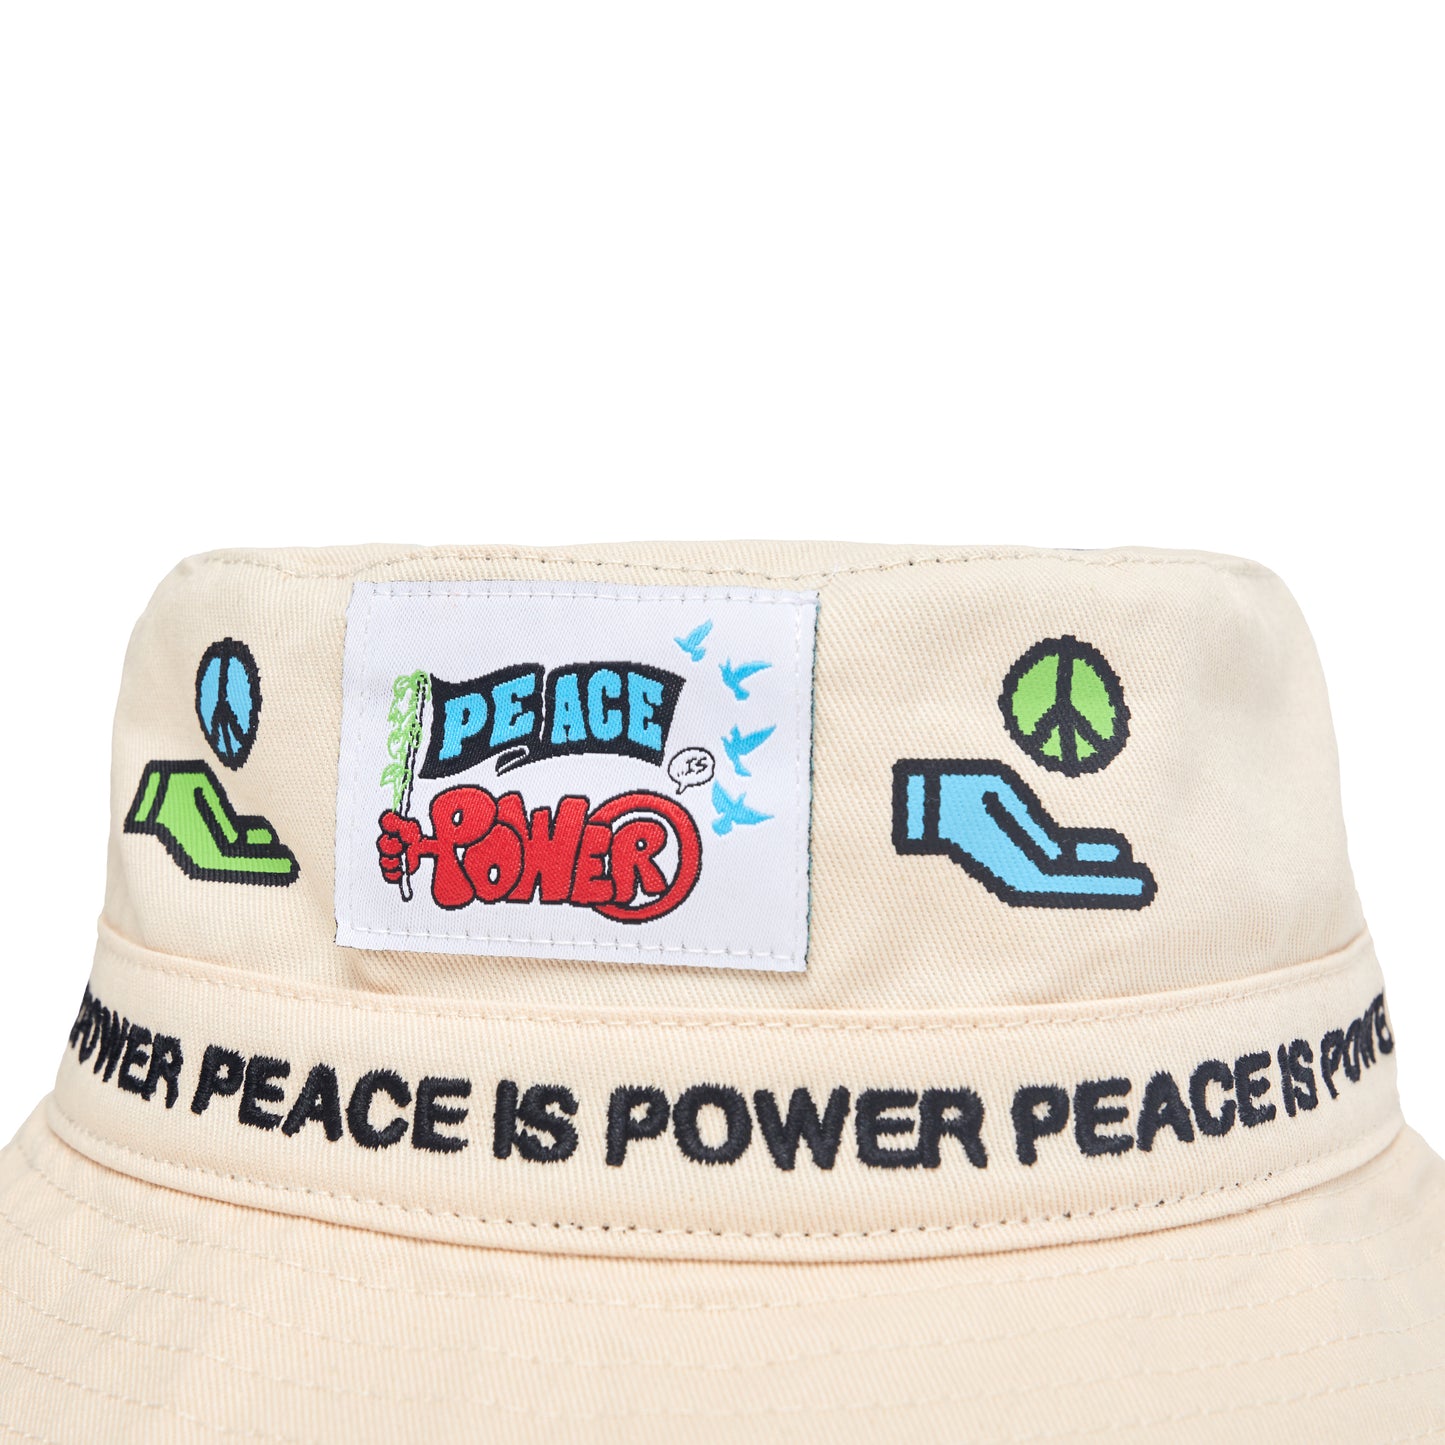 REMINDER FROM YOUR FRIENDS BUCKET HAT